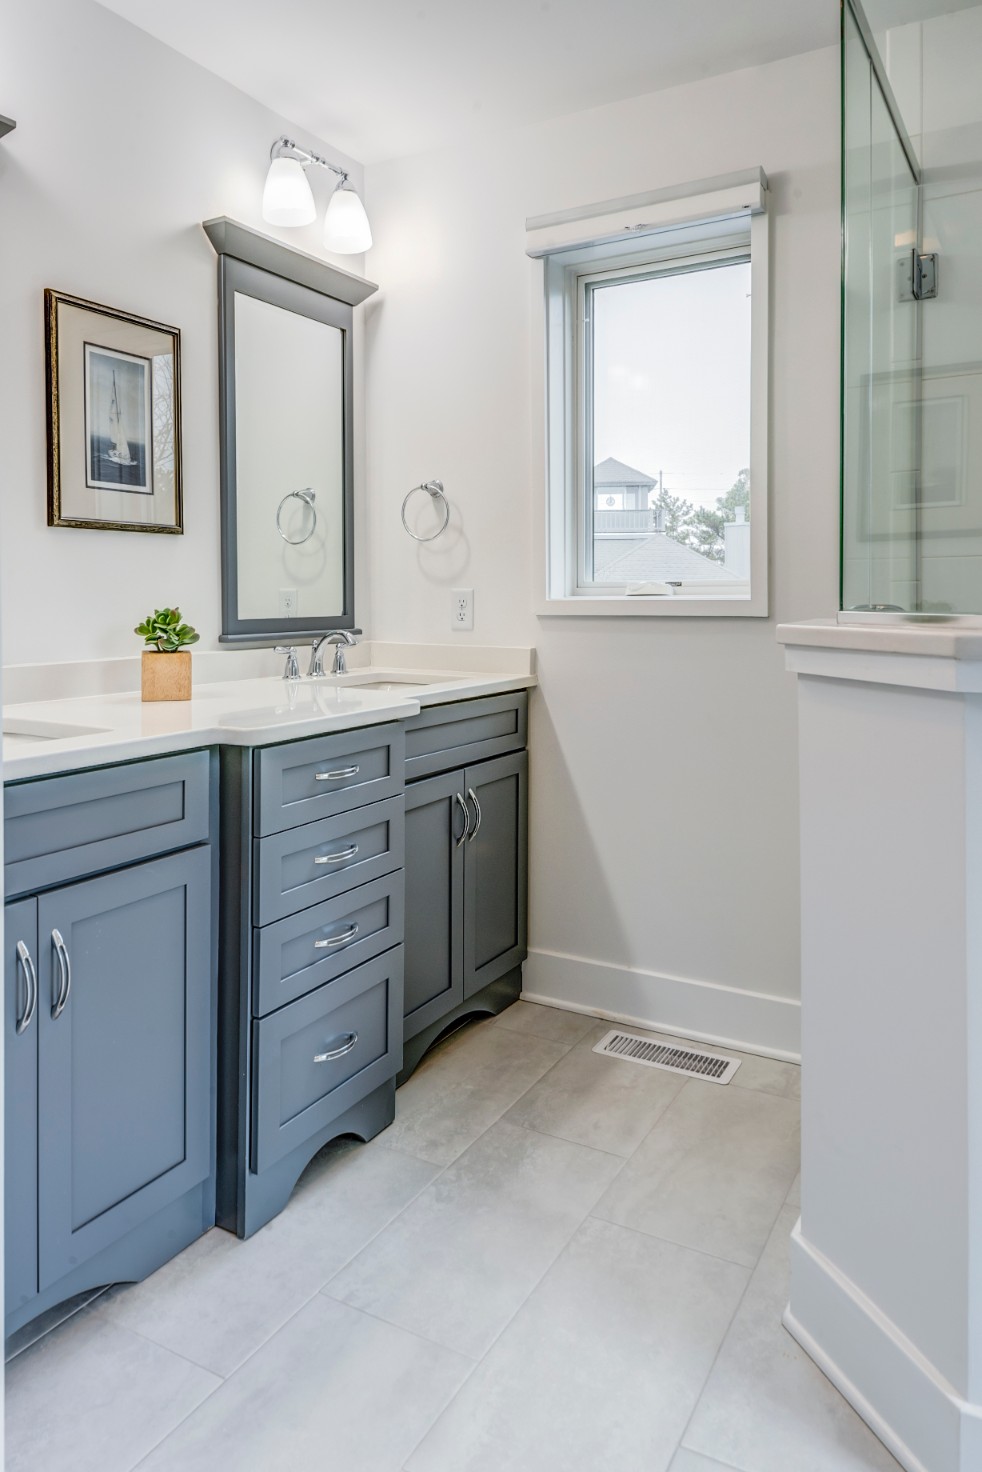 Cotton Patch Hills Renovation in Bethany Beach DE - Bathroom with White Wall Paint and Shaker Cabinets